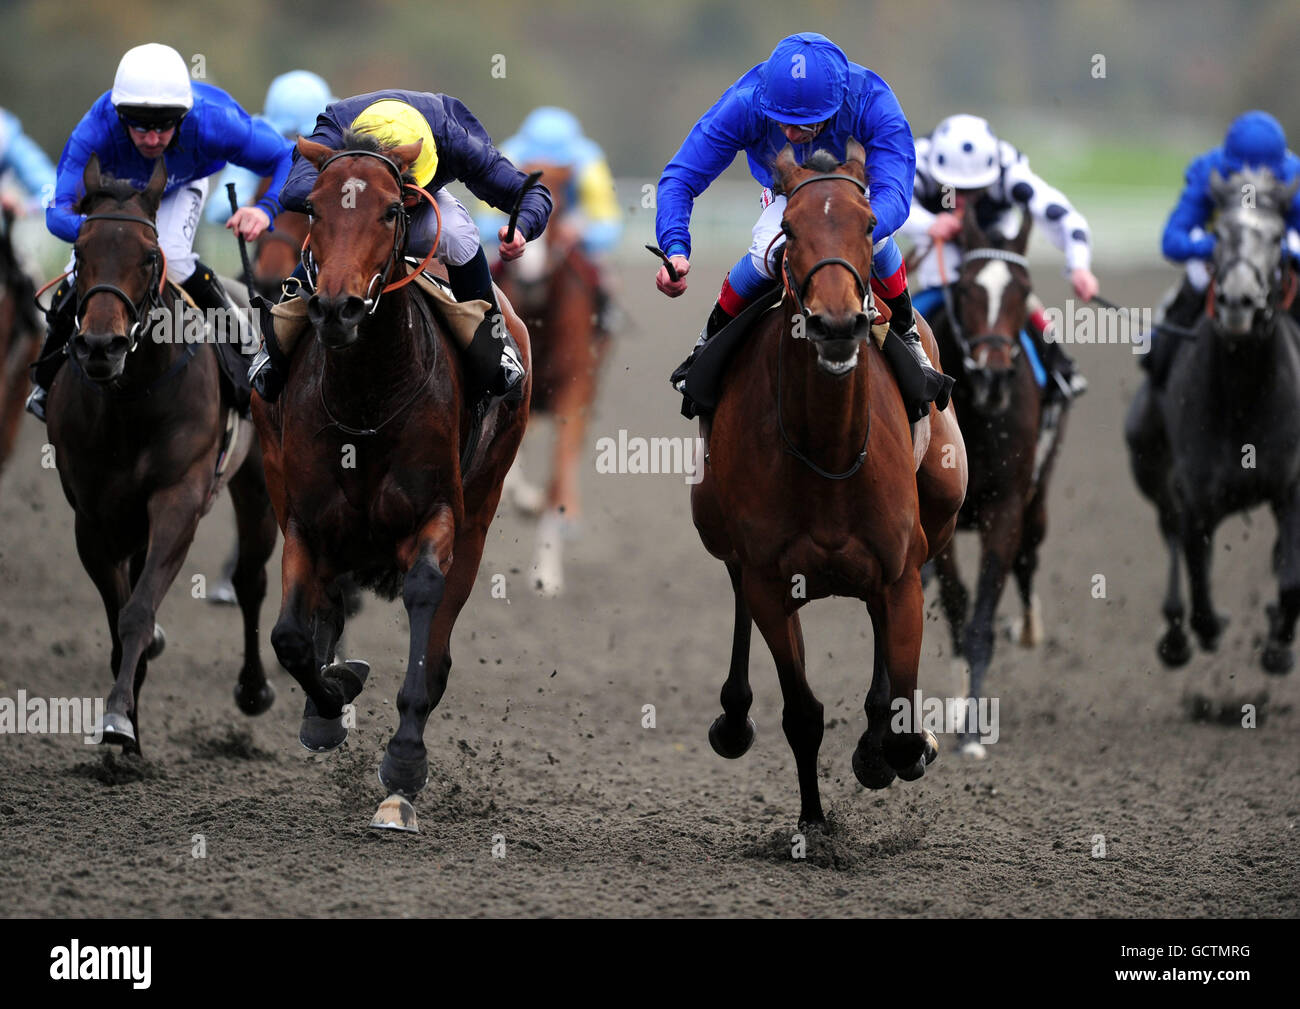 Frankie Dettori (blue) riding Baila Me comes home to win the E.B.F. Cockney Rebel First Crop Success River Eden Fillies' Stakes Stock Photo